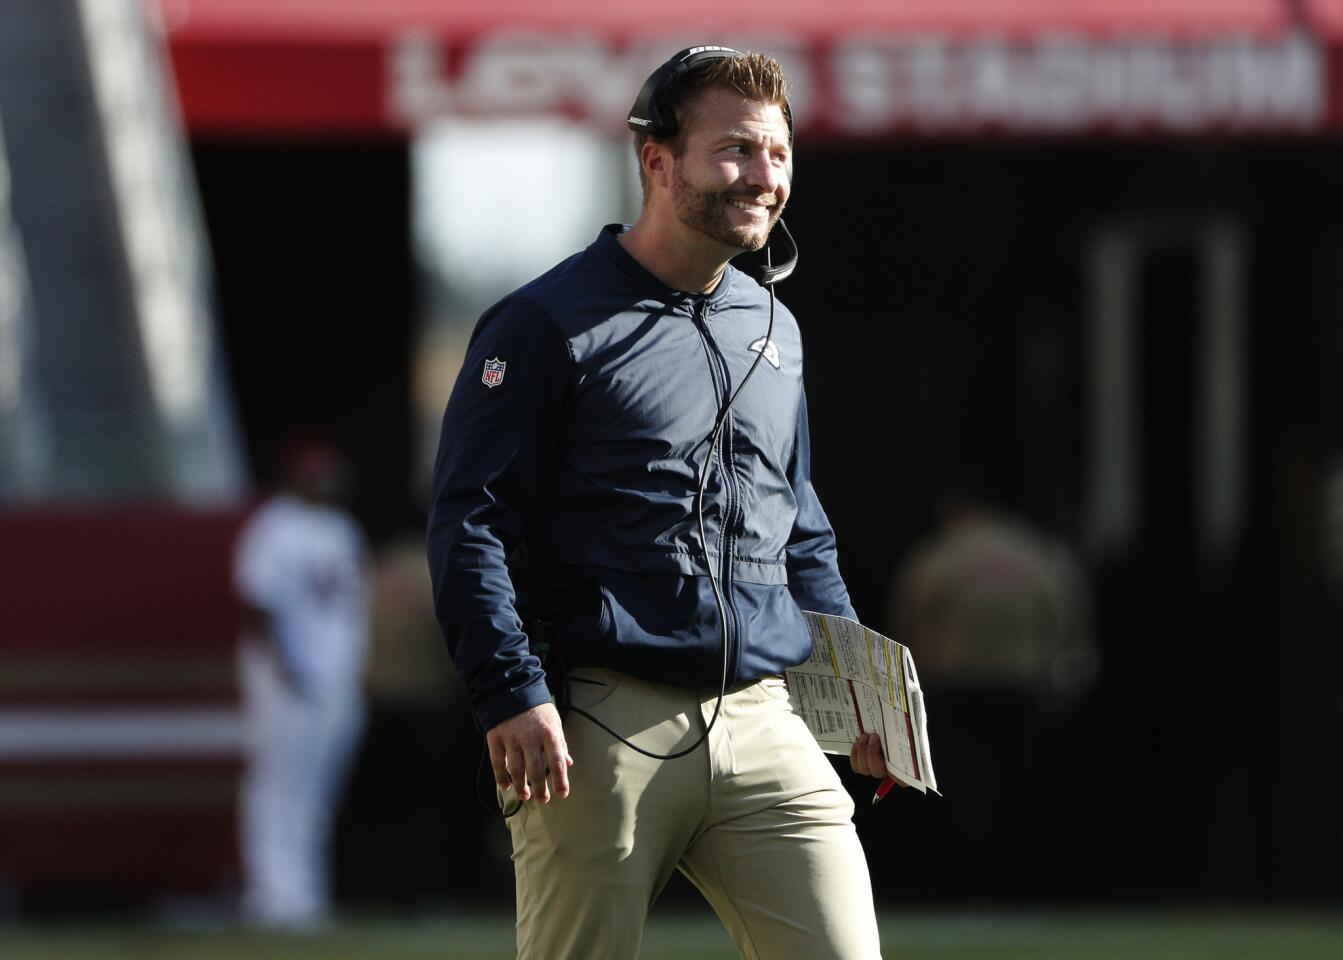 Rams head coach Sean McVay has a lot to smile about as the Rams beat the 49ers 39-10 at Levi's Stadium on Sunday in Santa Clara.